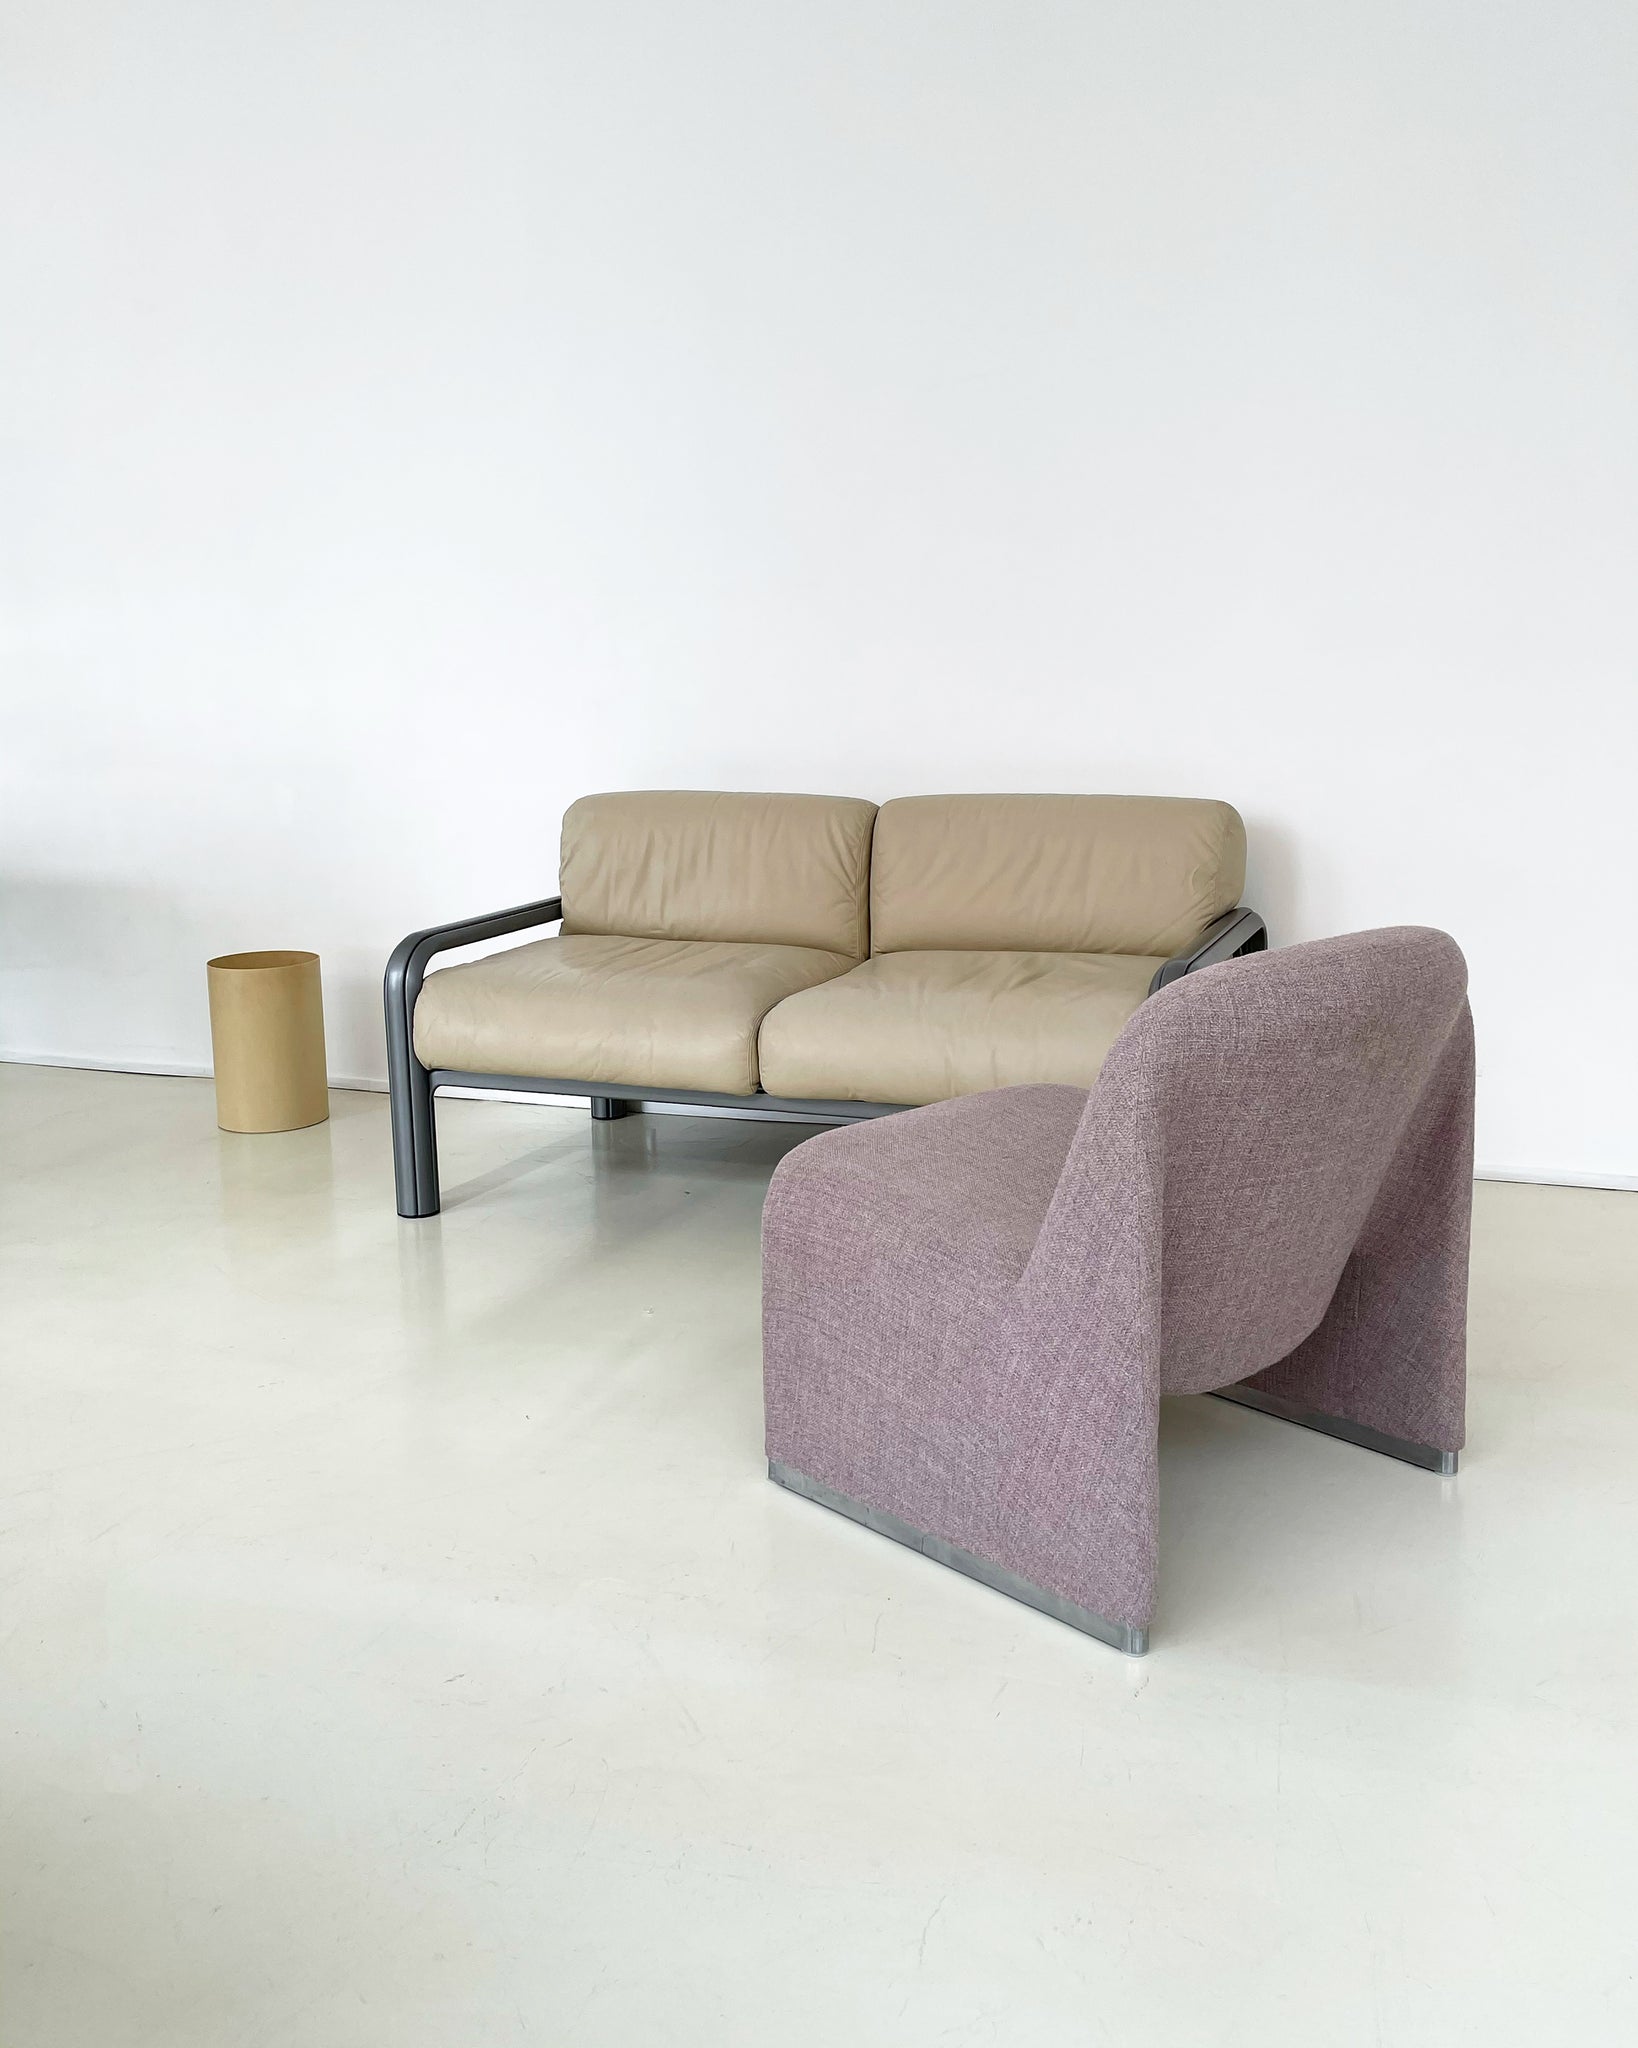 1970s Alky Chair by Giancarlo Piretti for Castelli - Each